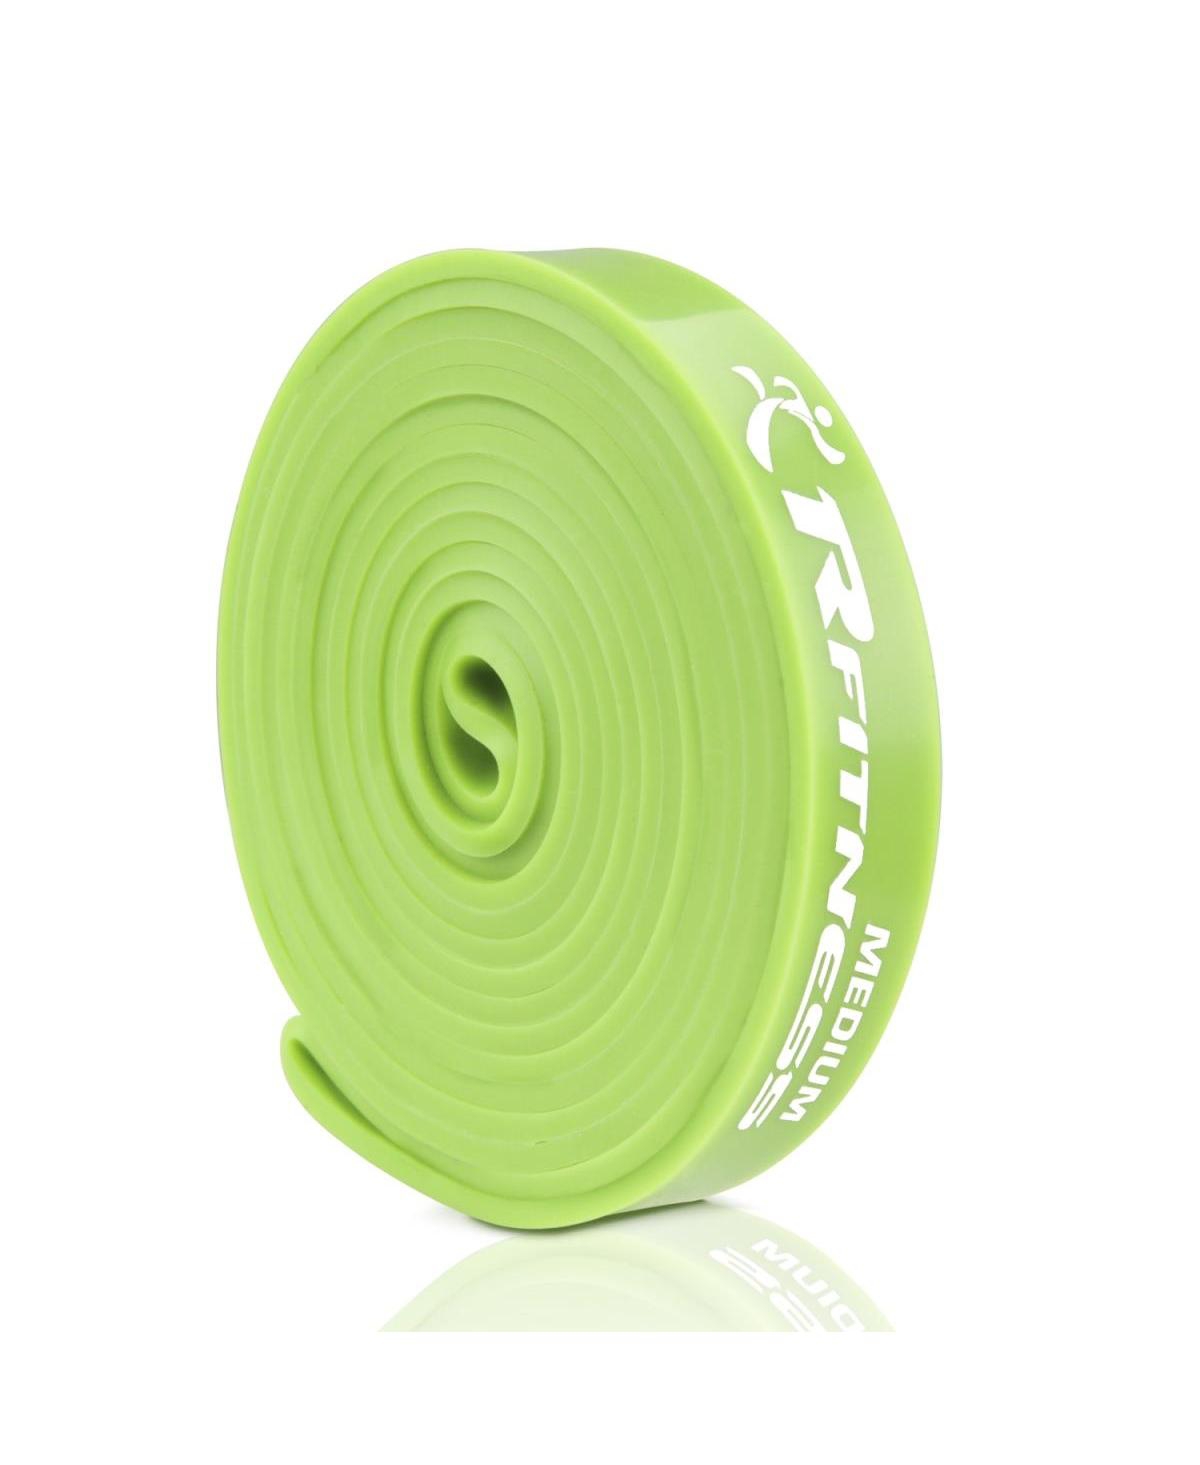 Furinno41 in. Rfitness Professional Long Loop Stretch Latex Exercise Band, Green - Medium - Green